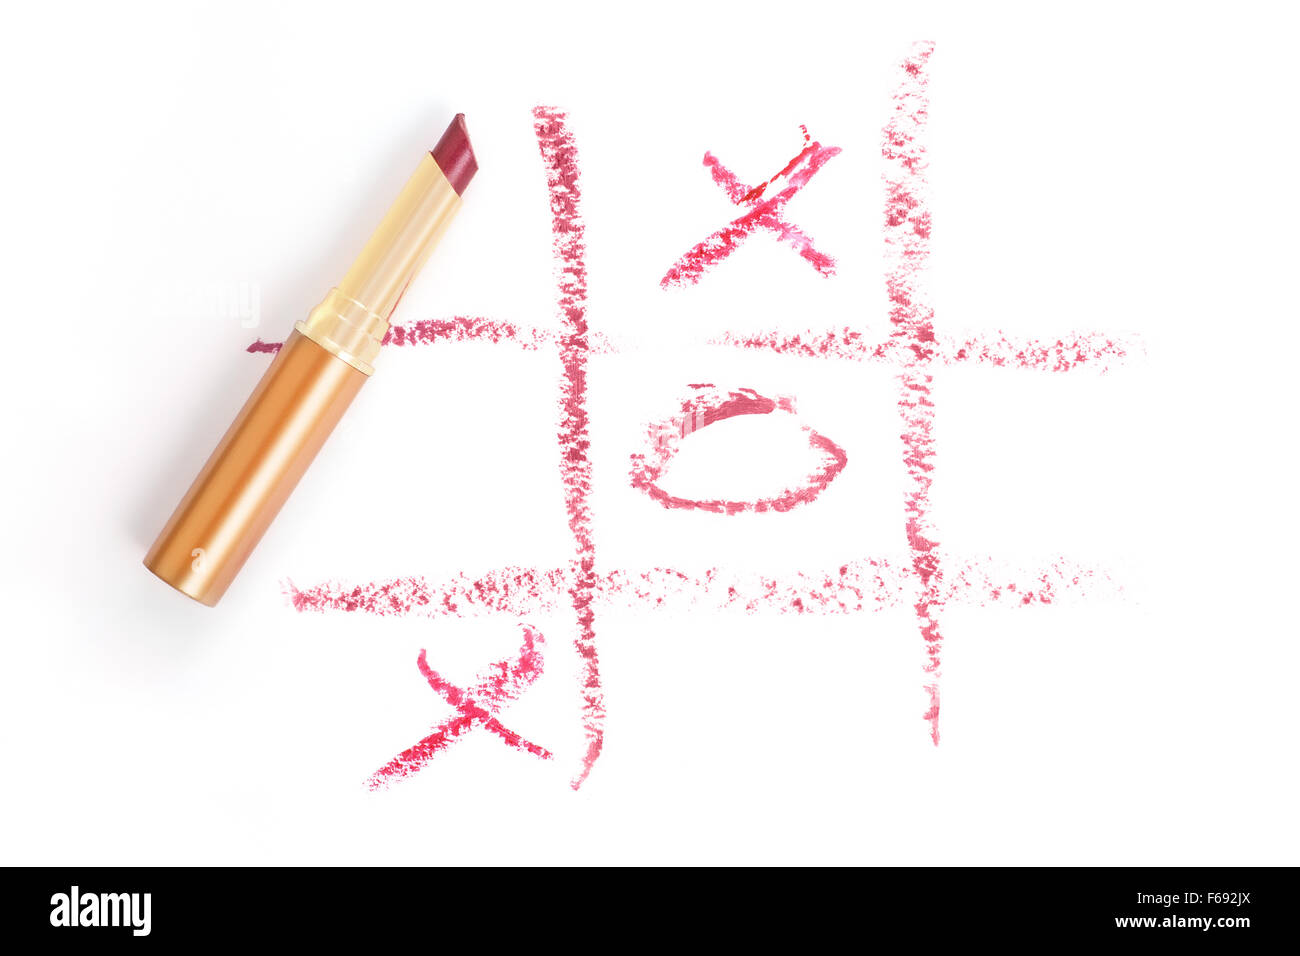 Smudge lipstick drawing. Tic-tac-toe on white background Stock Photo